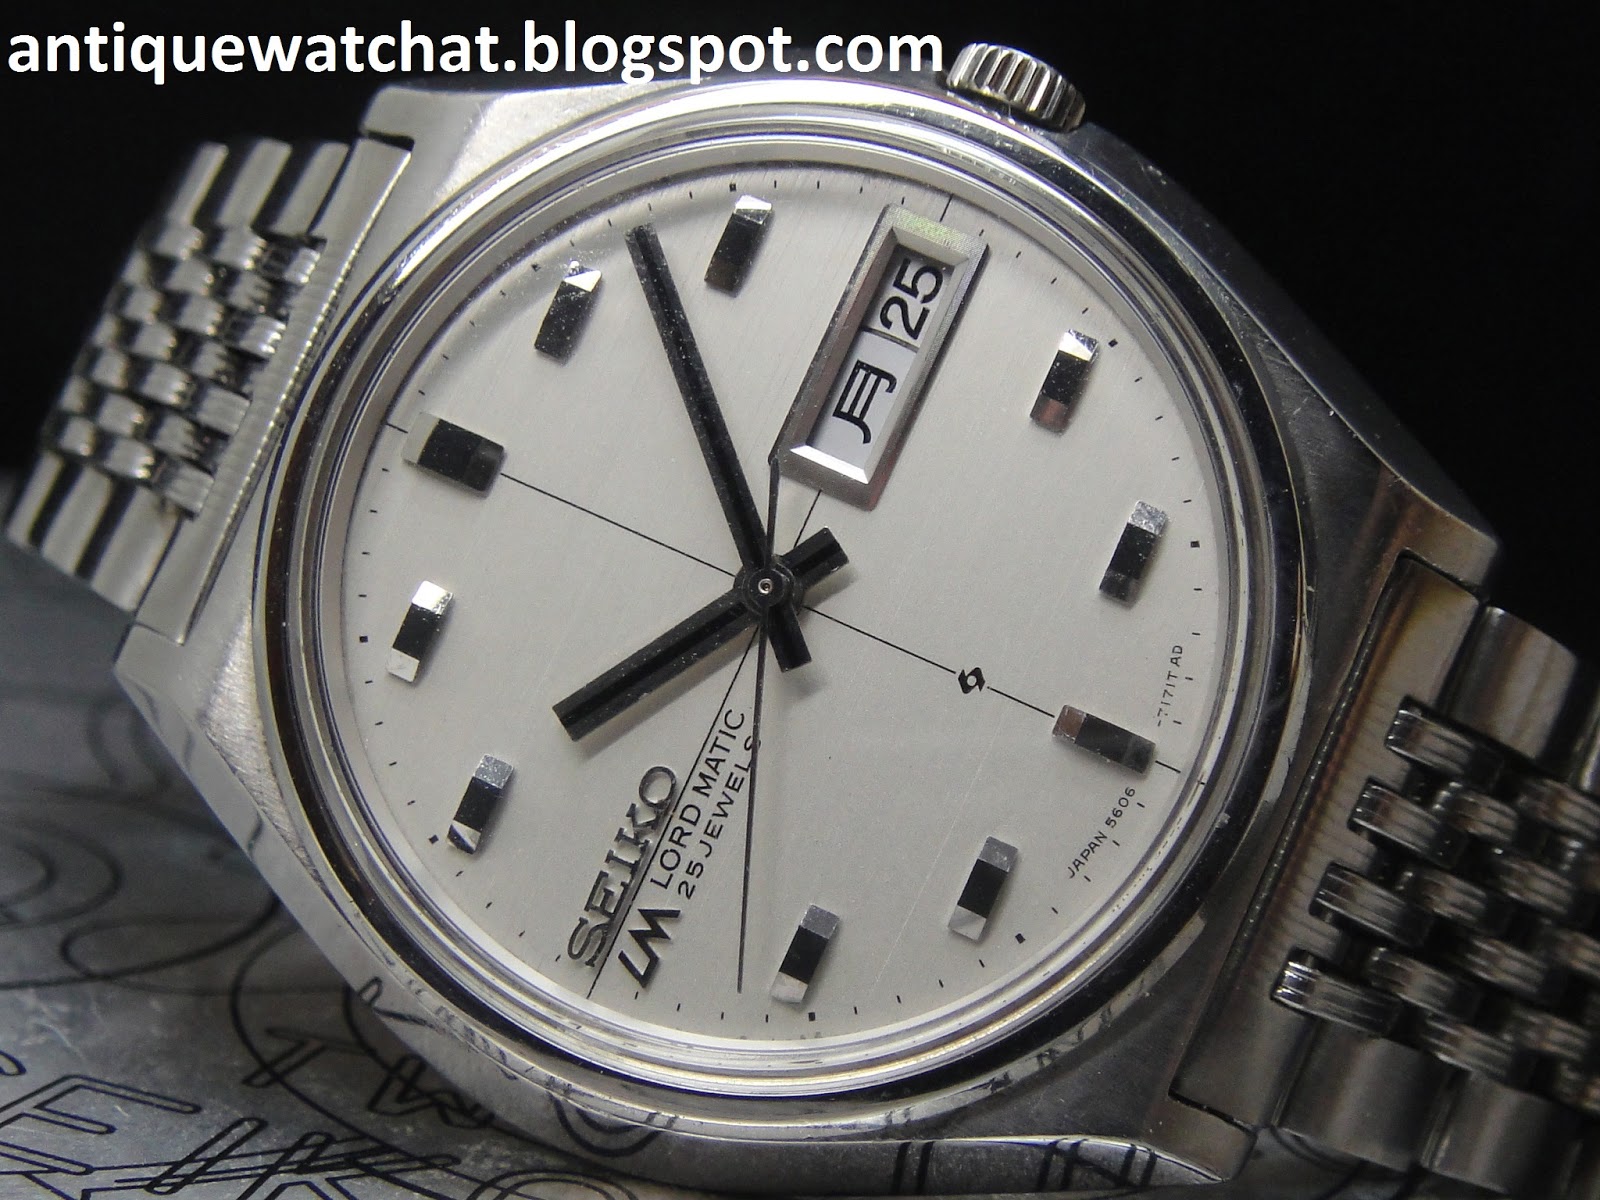 Antique Watch Bar: SEIKO LORD MATIC 5606-7010 SL43 (SOLD)